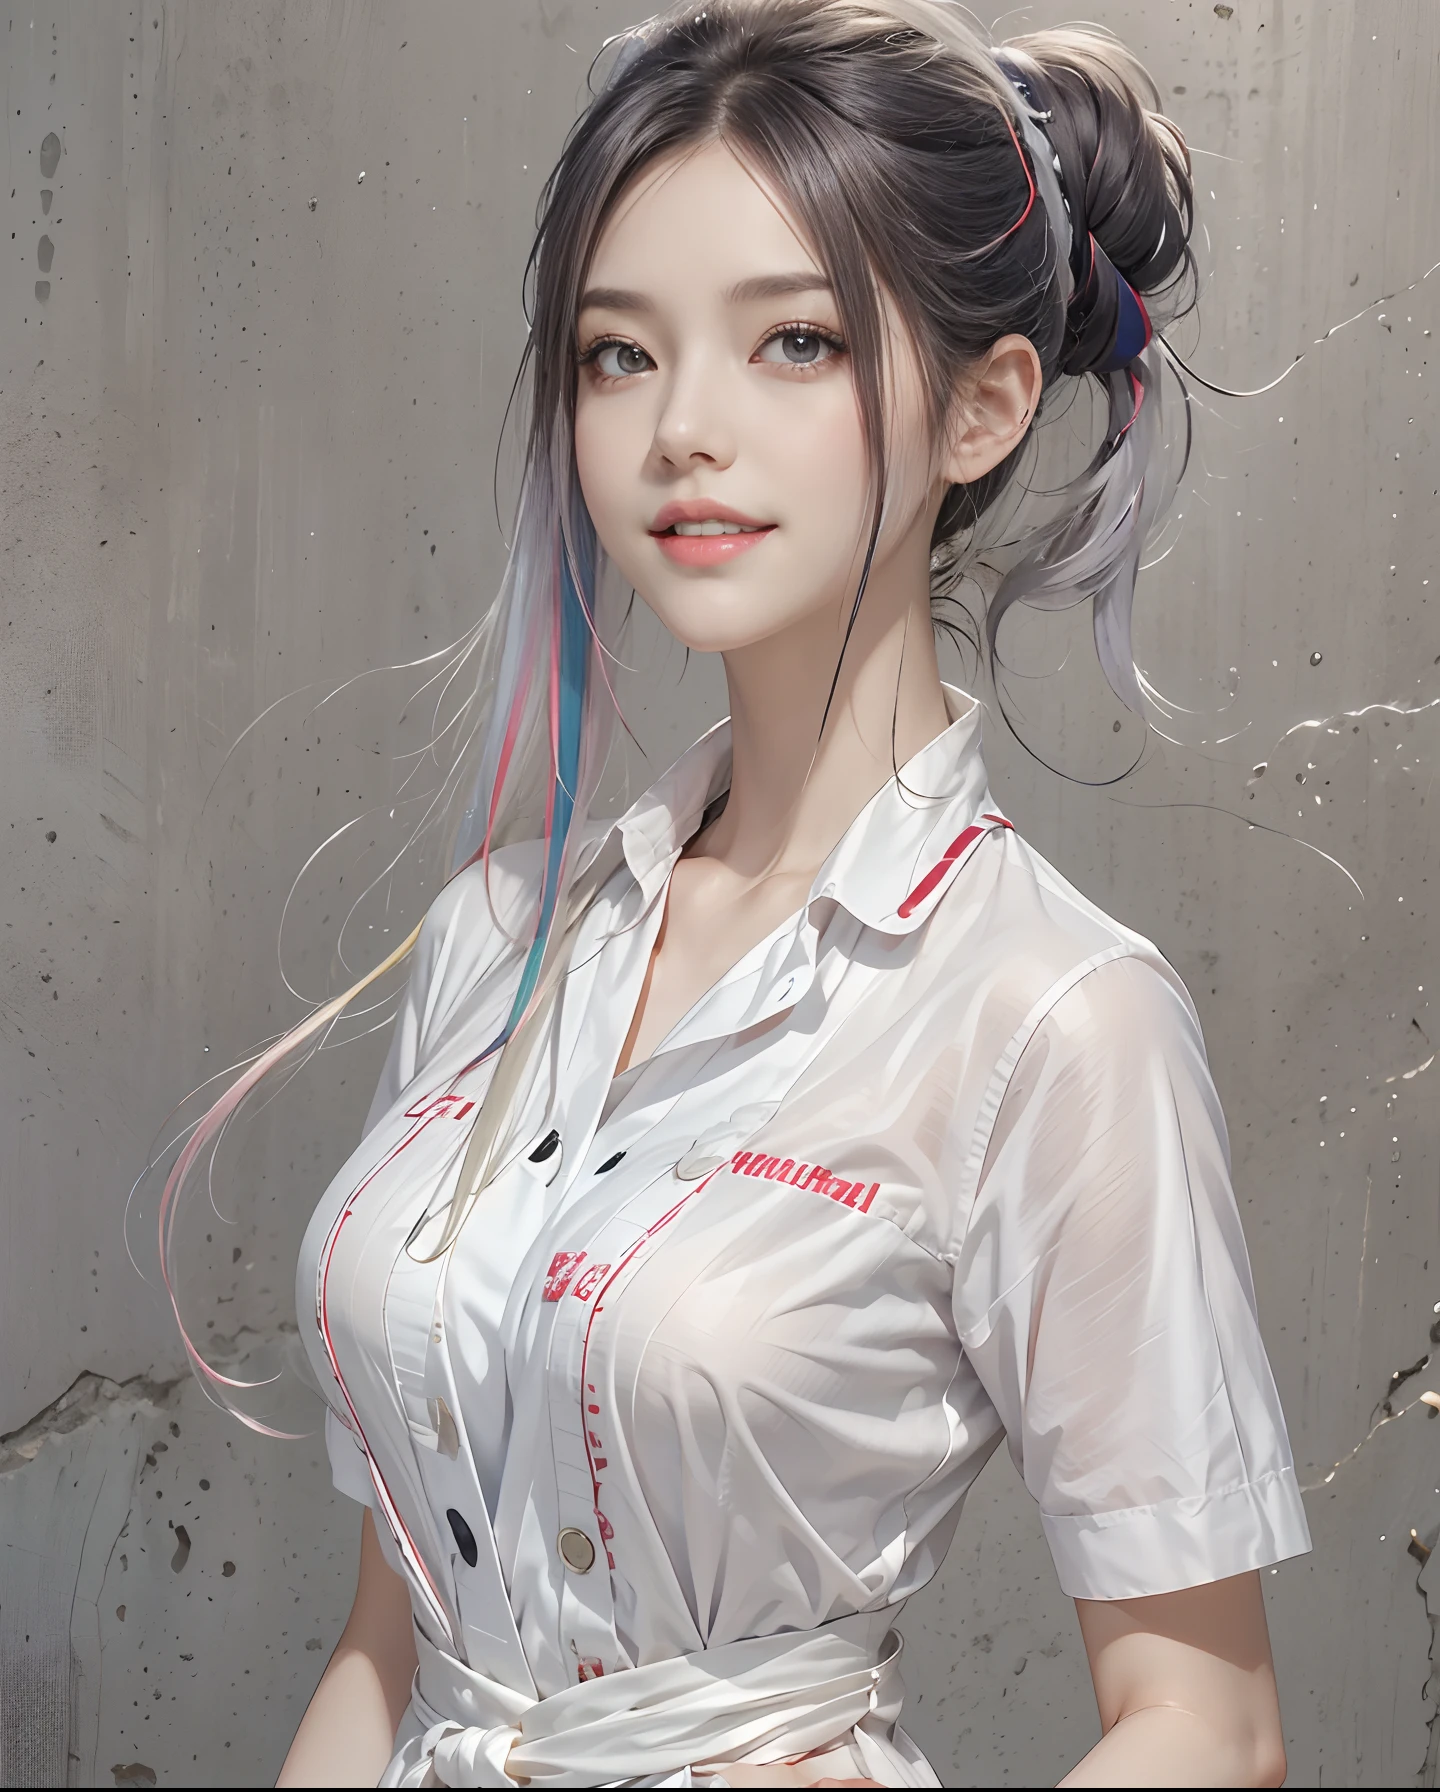 masutepiece、hight resolution、Nurse、30-year-old girl、１Girl Nurse、Looking at the camera、smil、Finish as shown in the photo、the skin is white and beautiful、Hair is long and beautiful、inner colored、Hair should be tied back、A slender、short-cut、